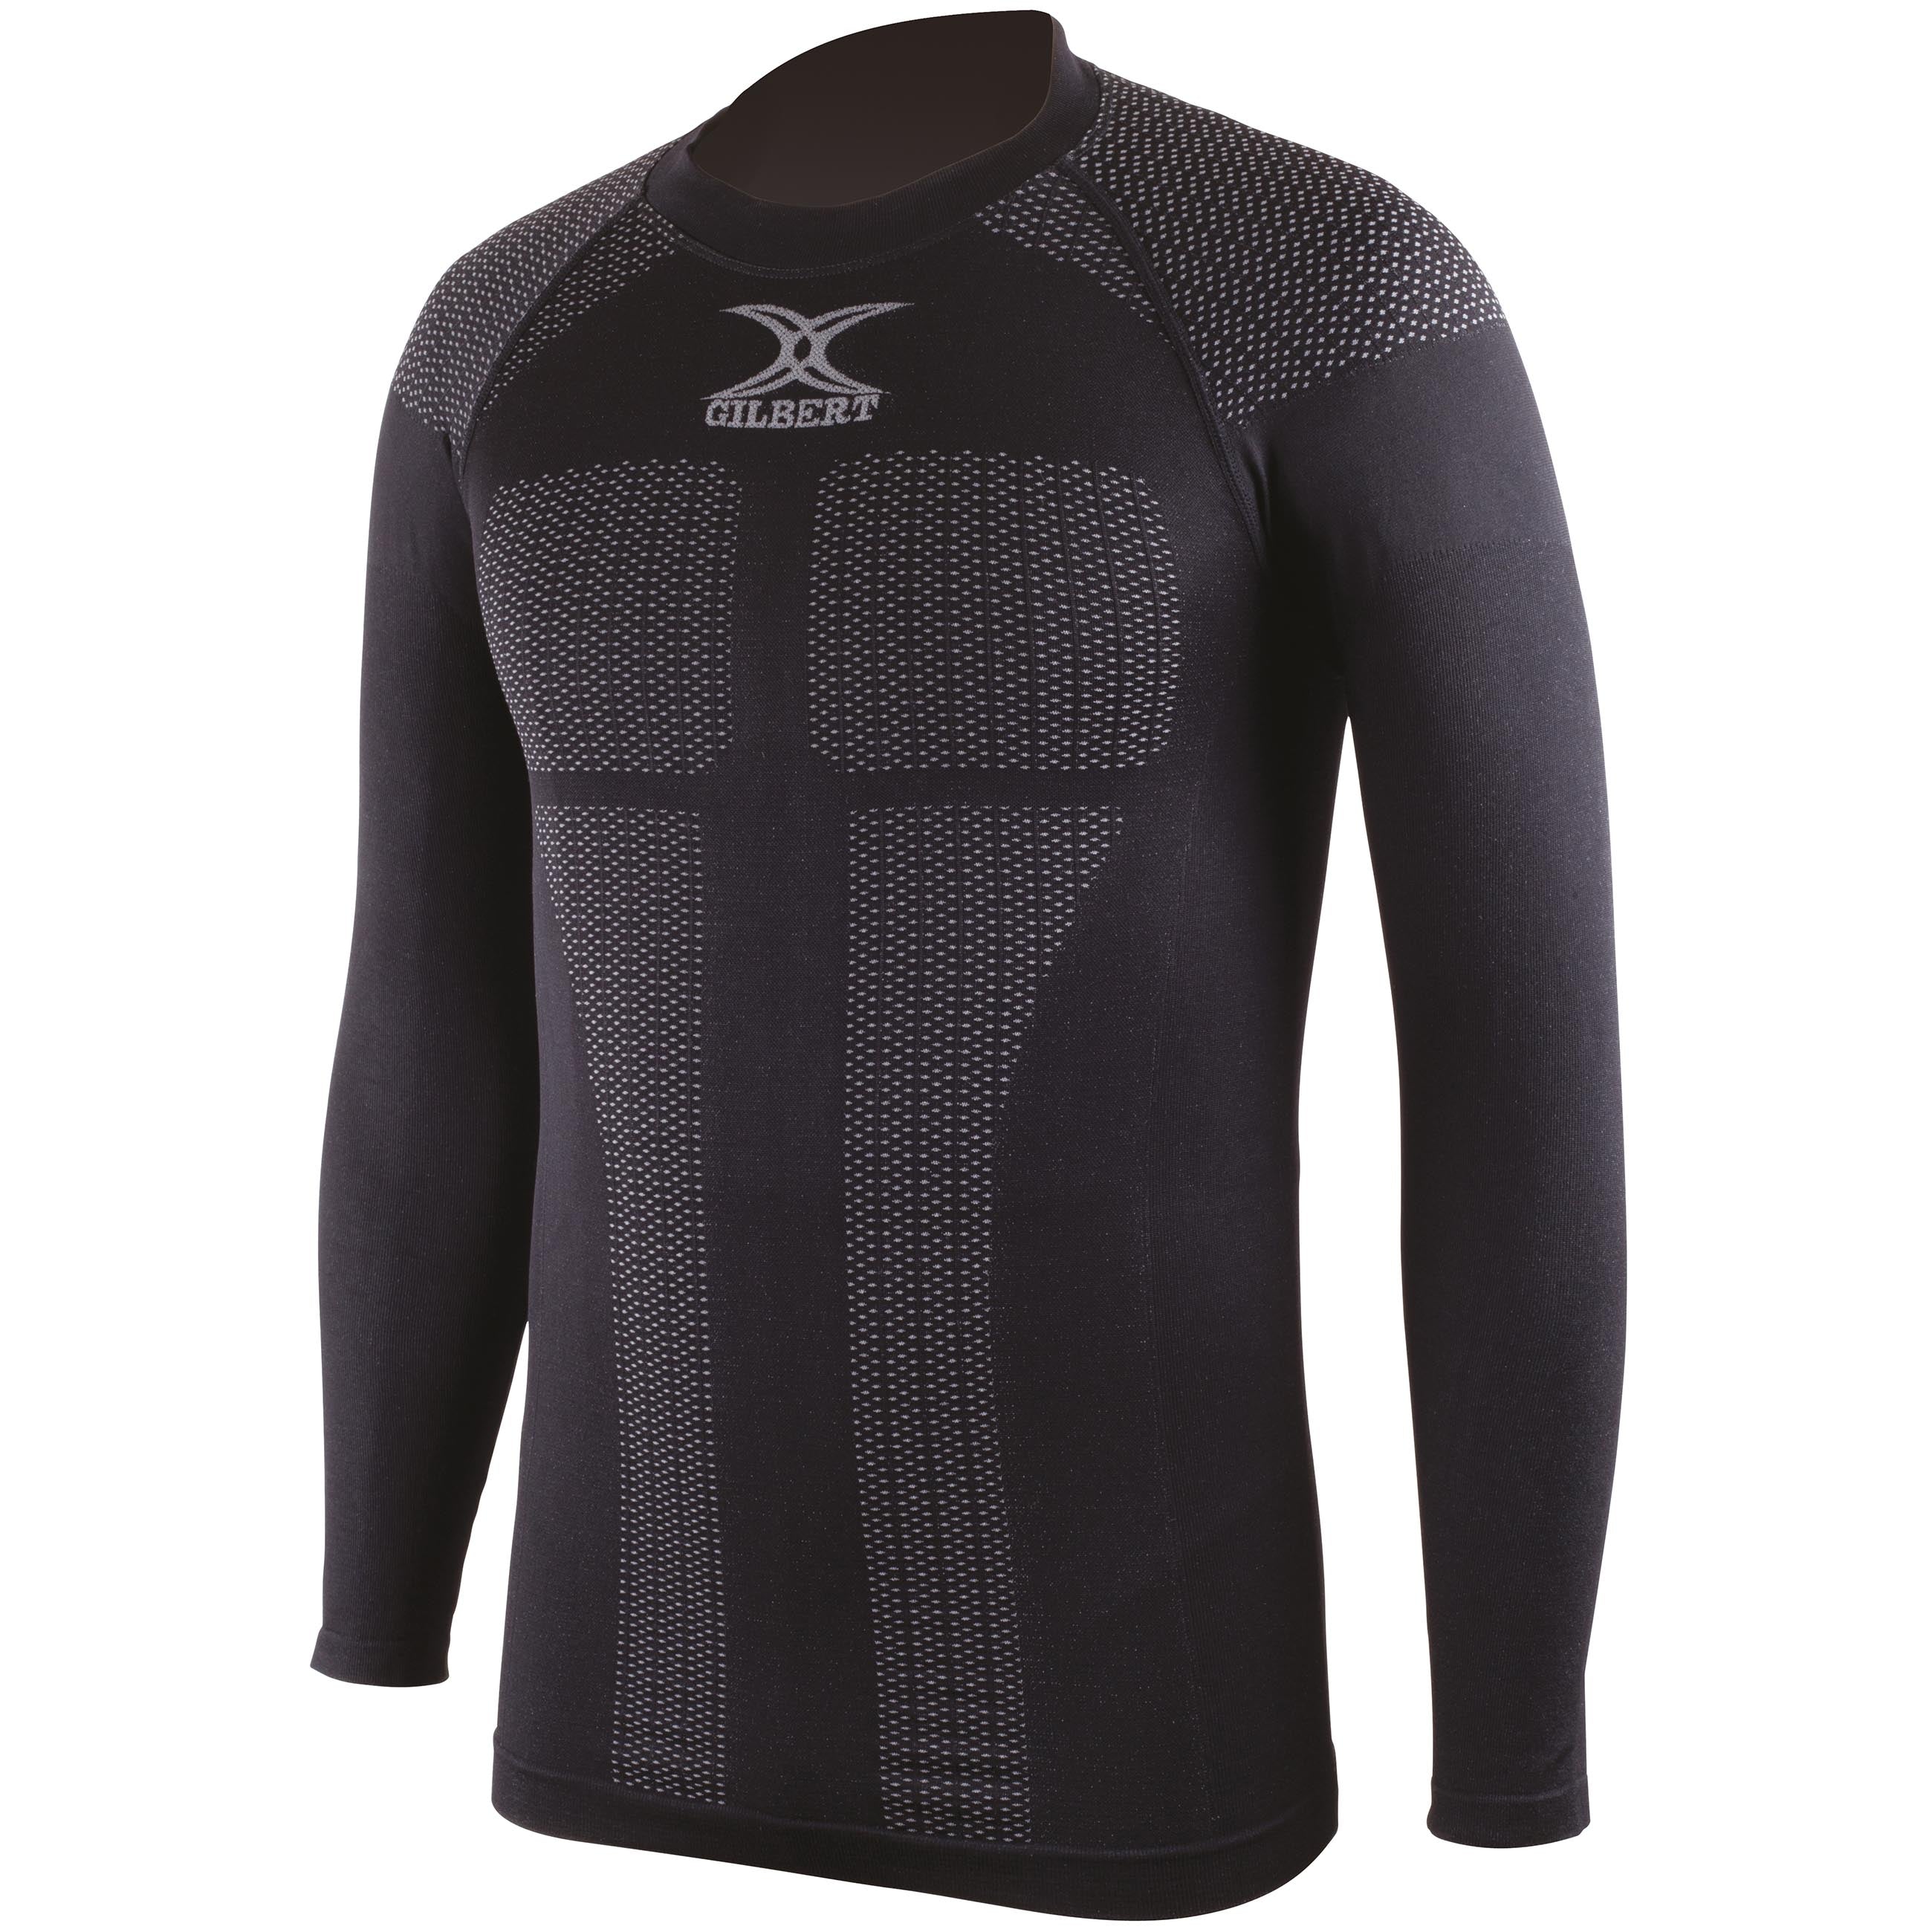 Compression Base Layer Top